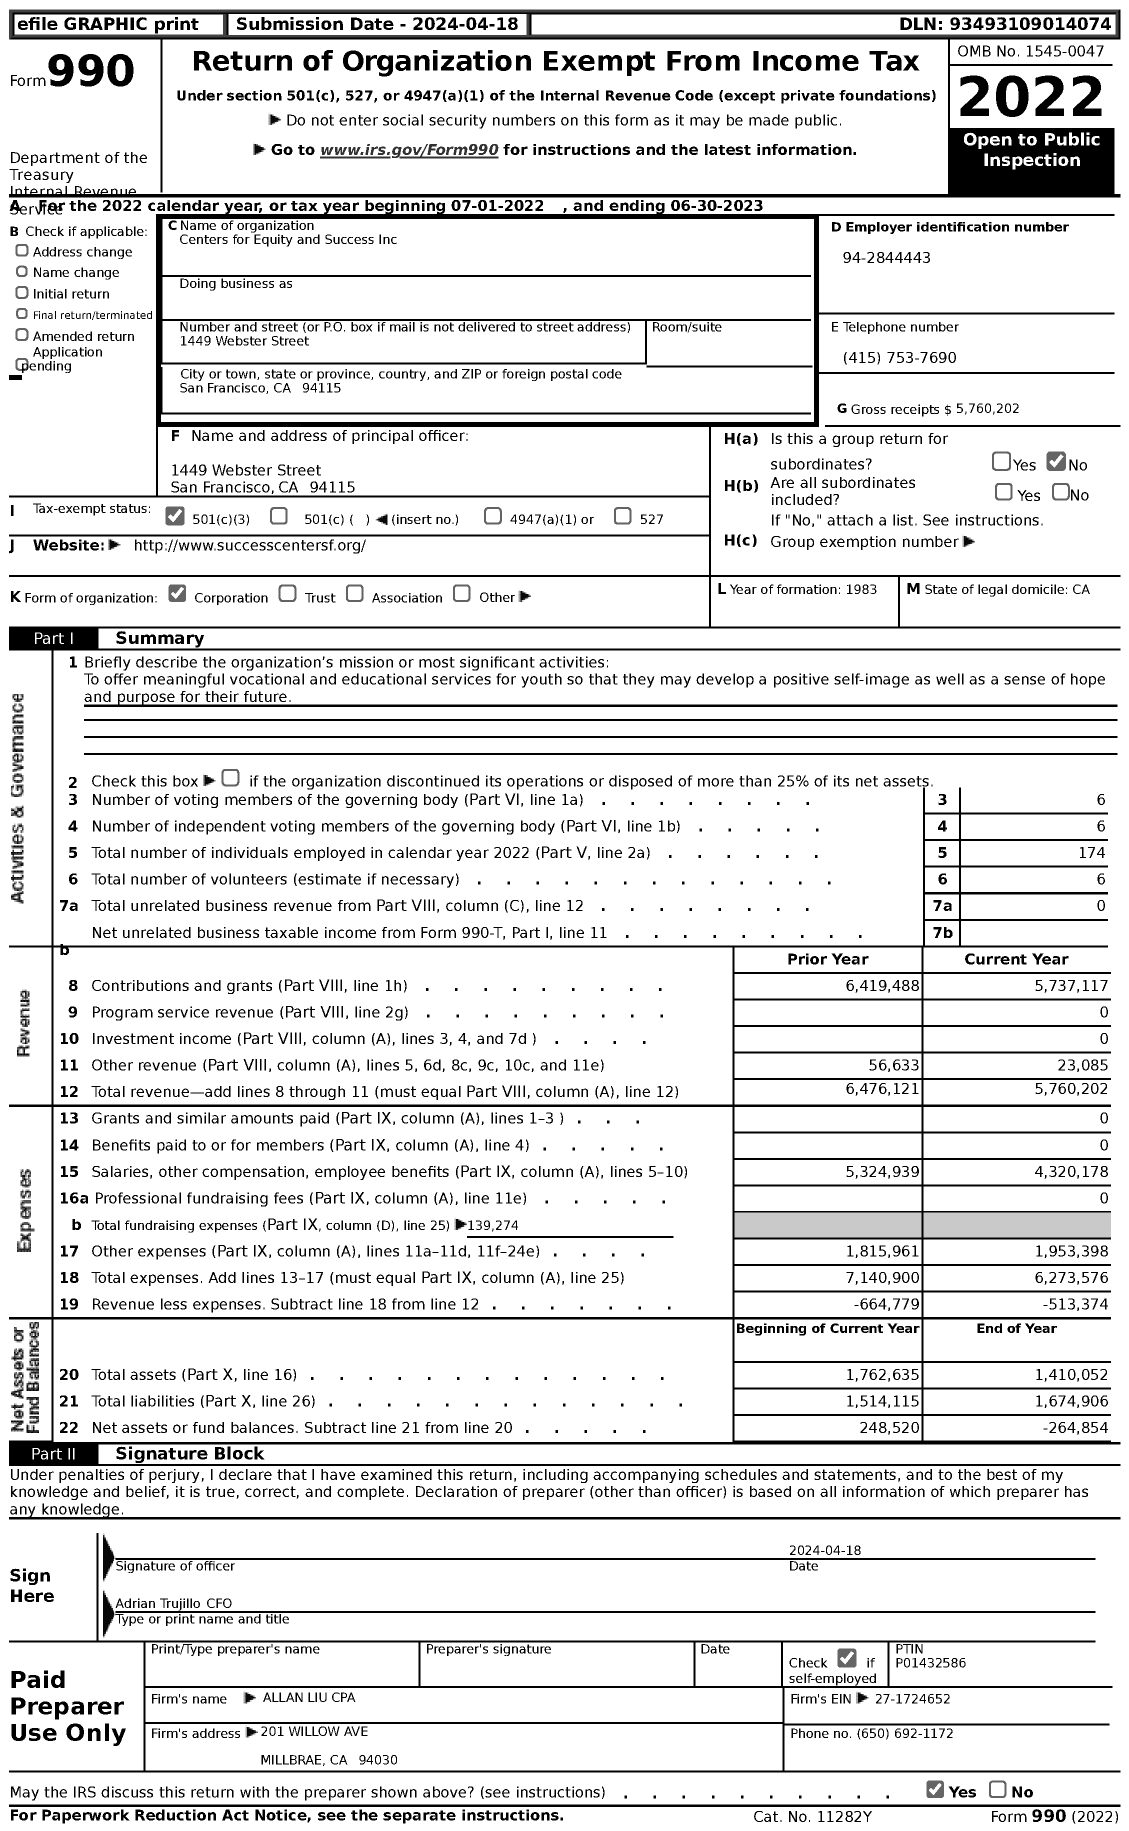 Image of first page of 2022 Form 990 for Centers for Equity and Success